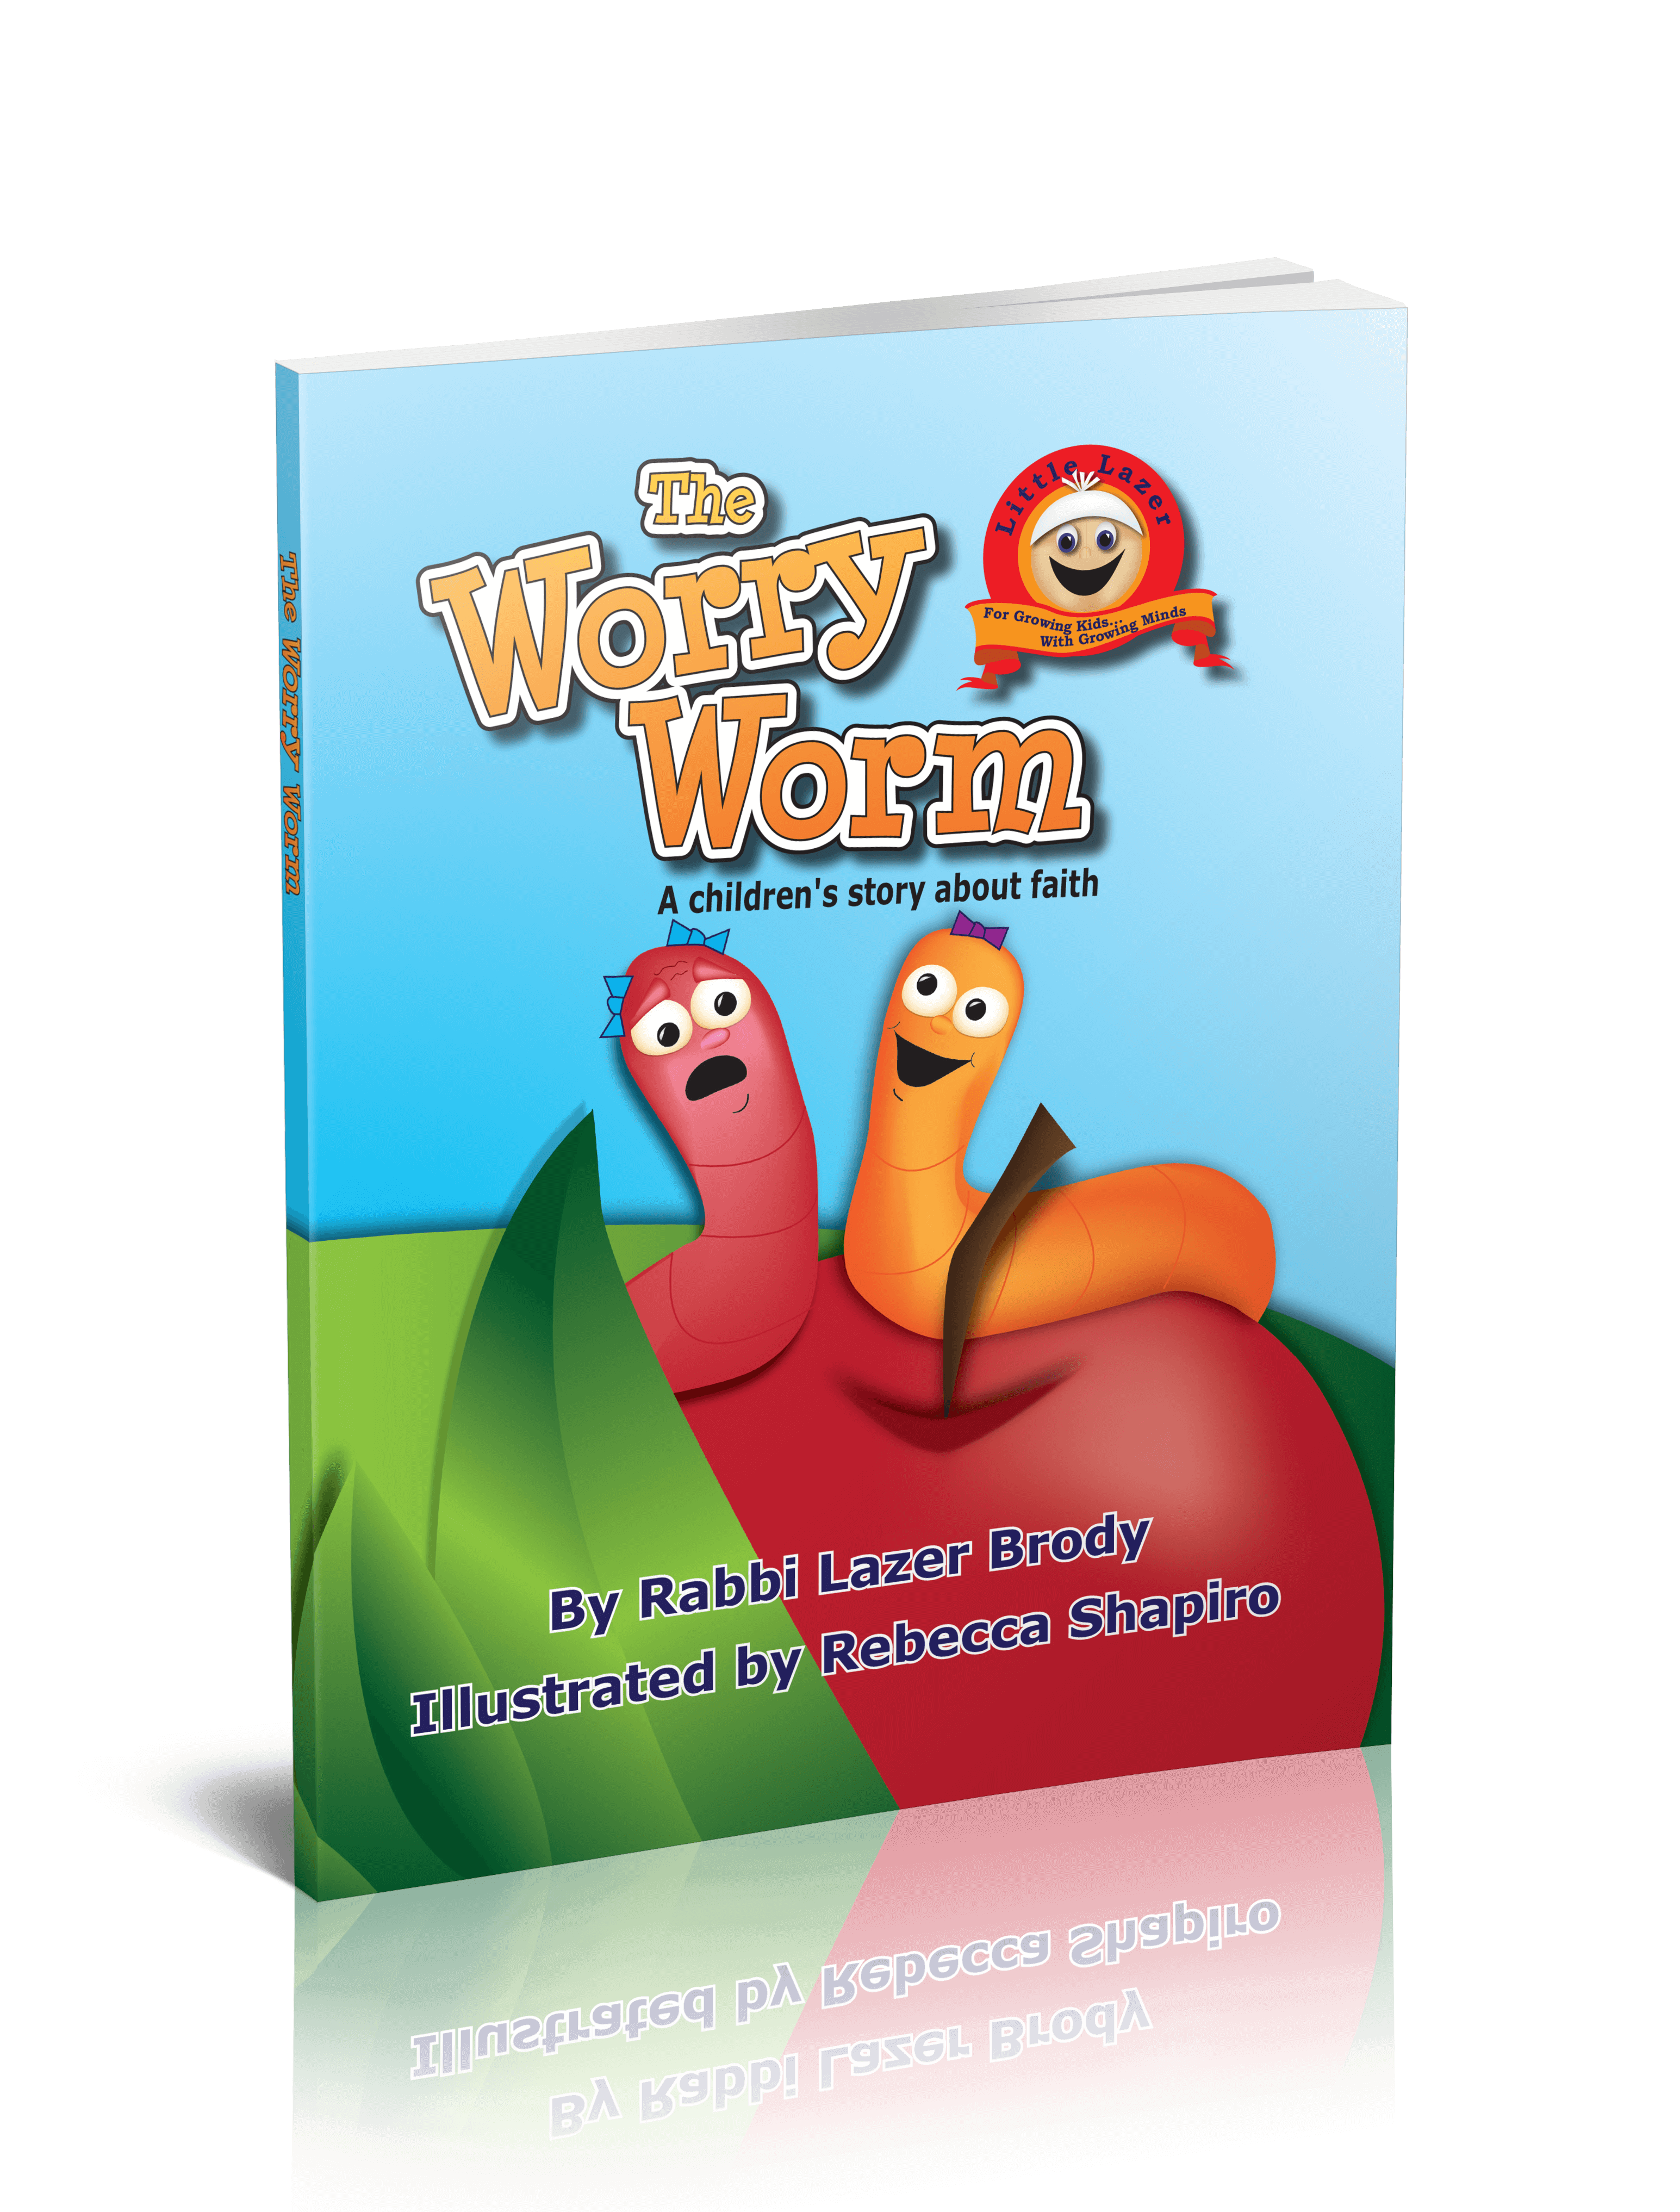 The Worry Worm By Lazer Brody text ratz publishing